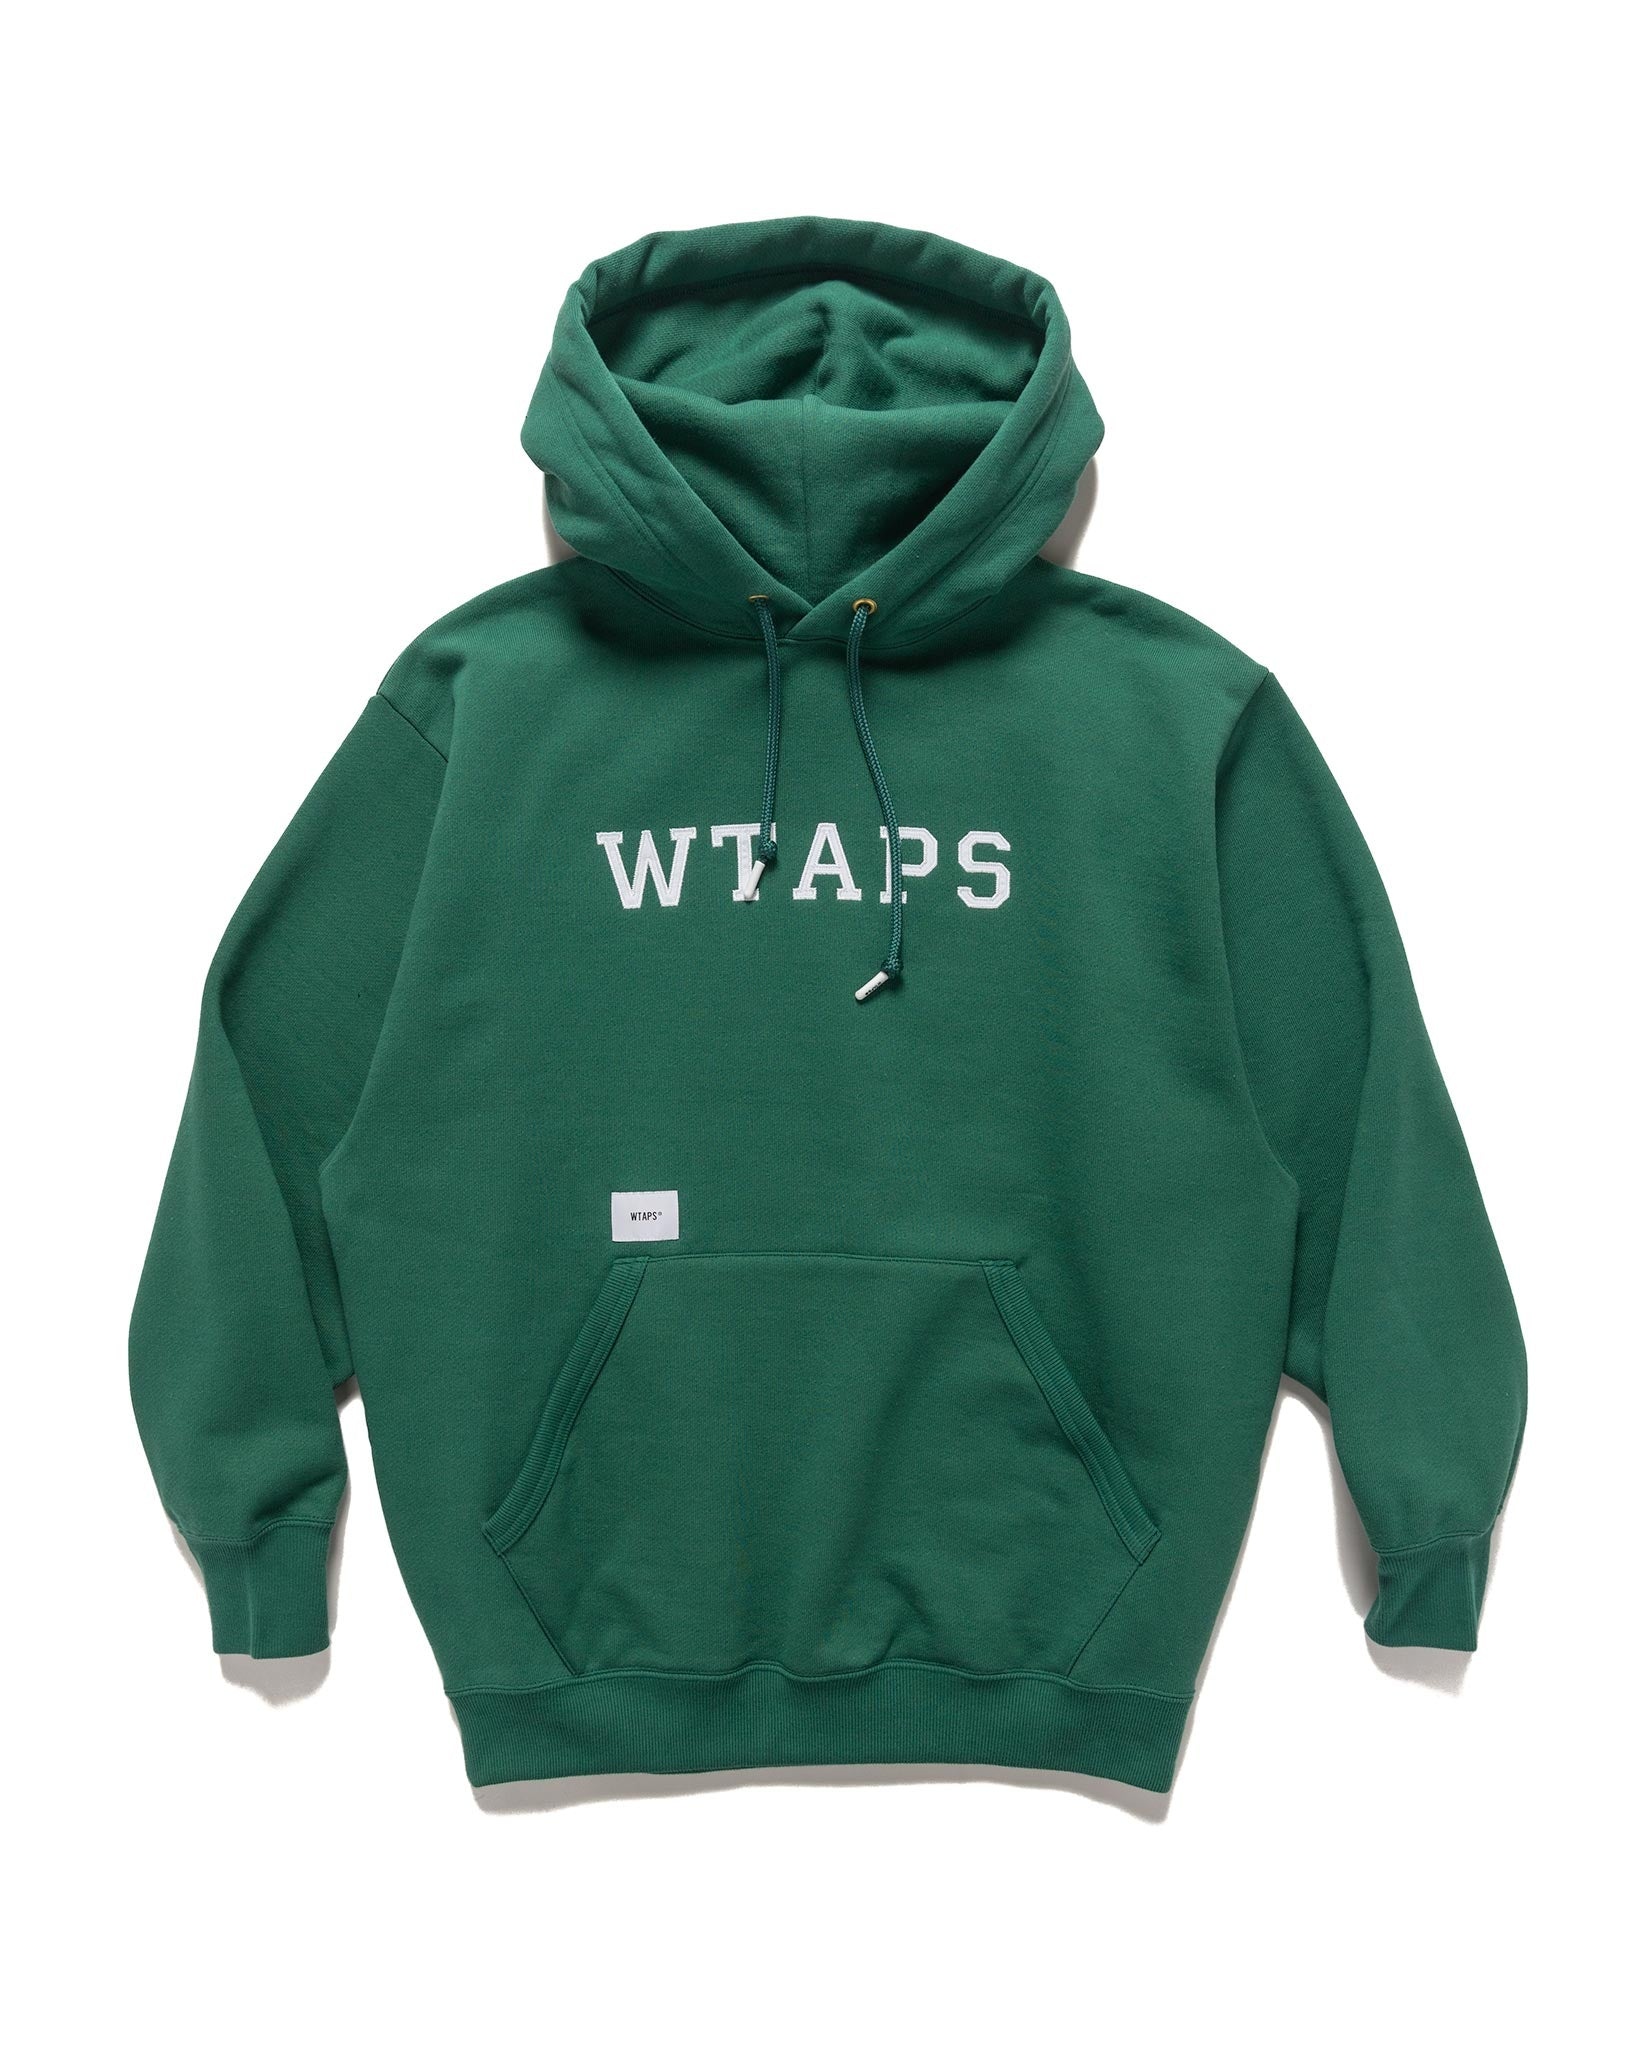 Academy / Hoody / Cotton. College Green - 1